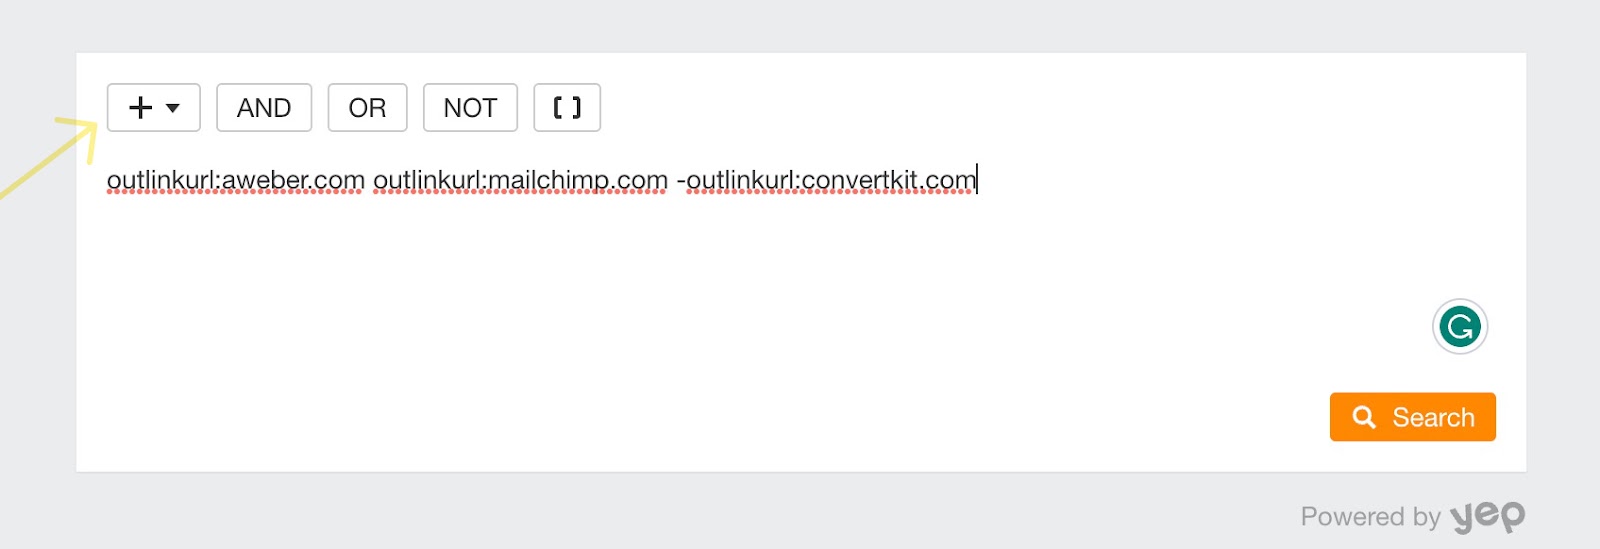 Using the outlinkurl search operator